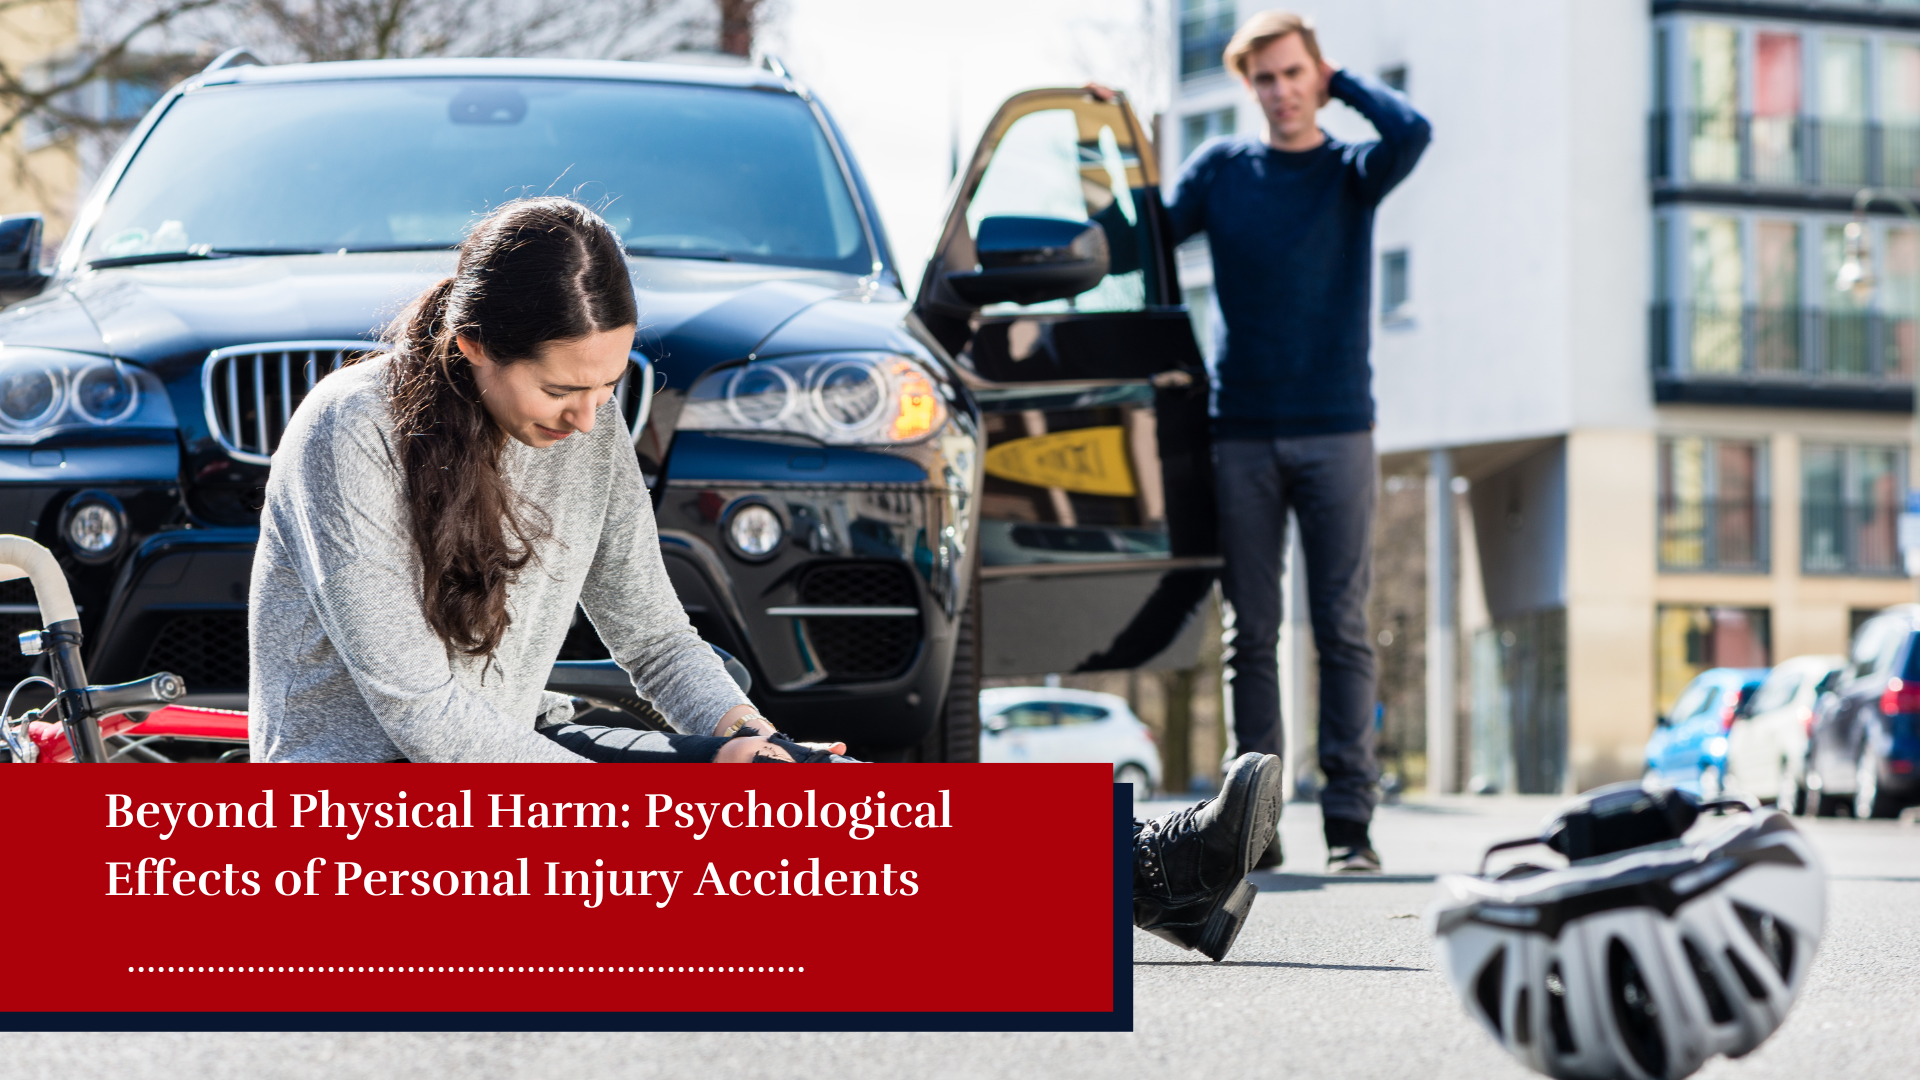 Beyond Physical Harm Psychological Effects of Personal Injury Accidents